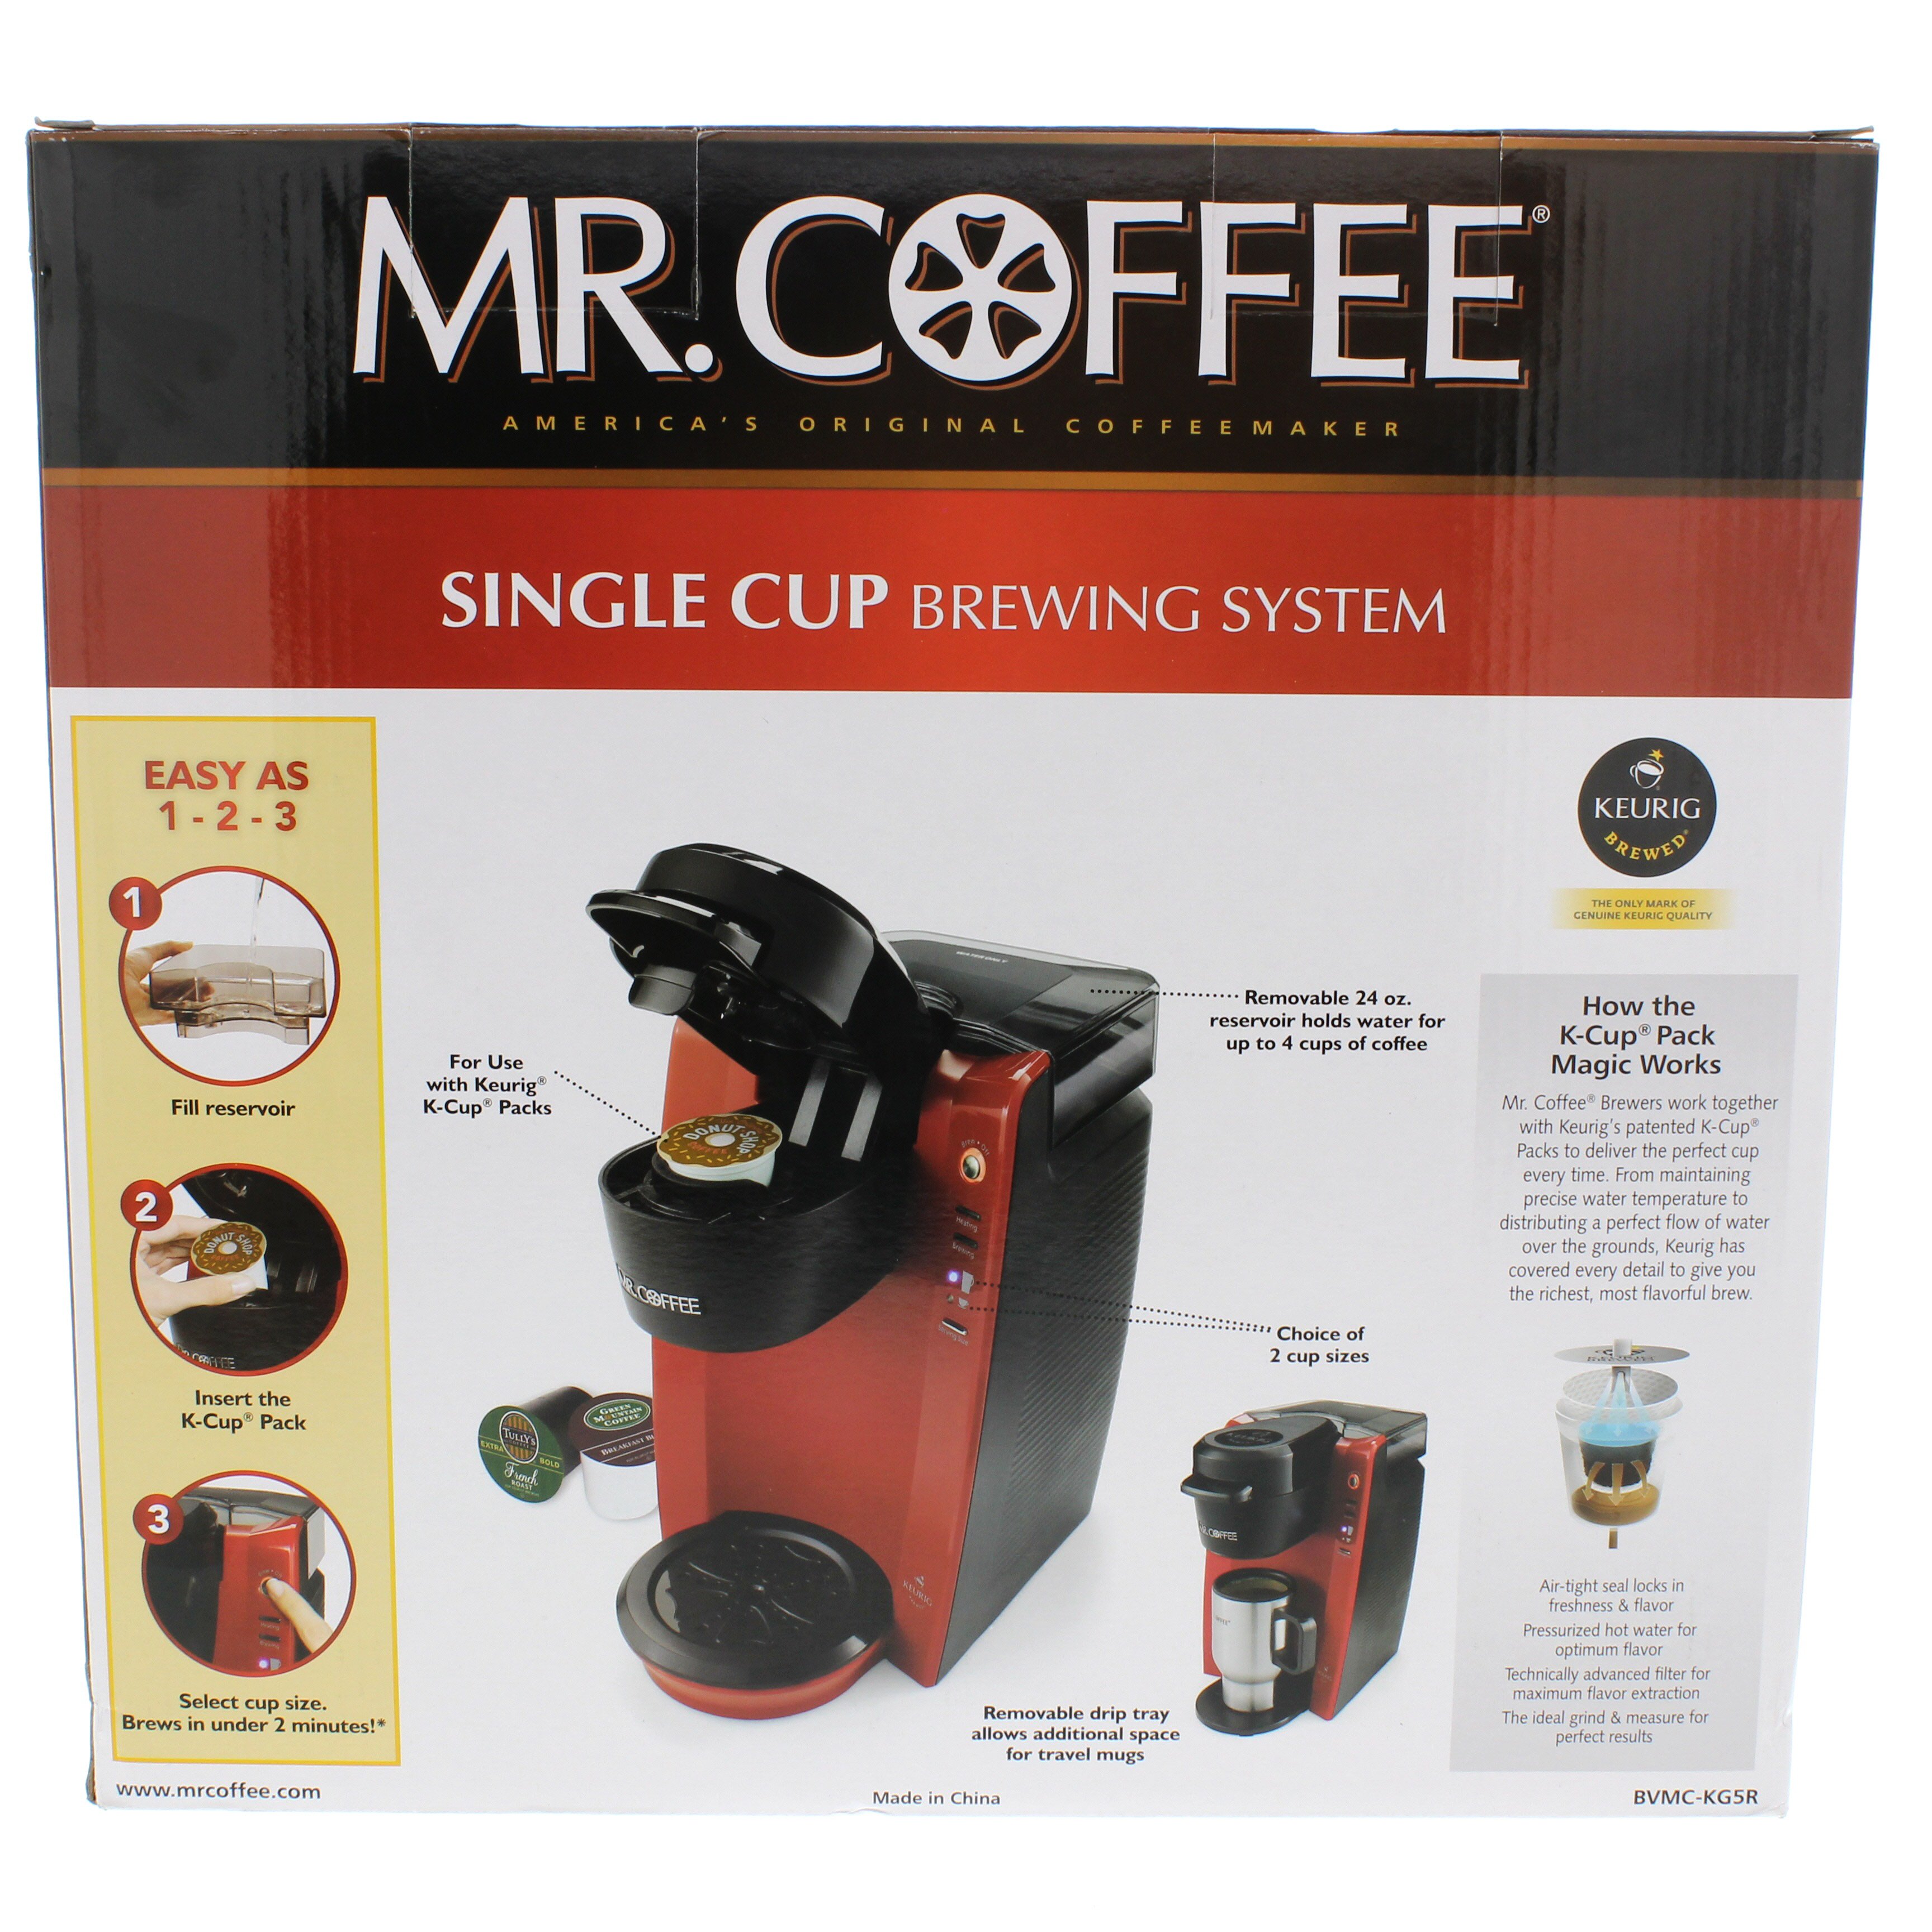 Mr. Coffee Single Serve Latte + Iced + Hot Coffee Maker & Milk Frother -  Shop Coffee Makers at H-E-B